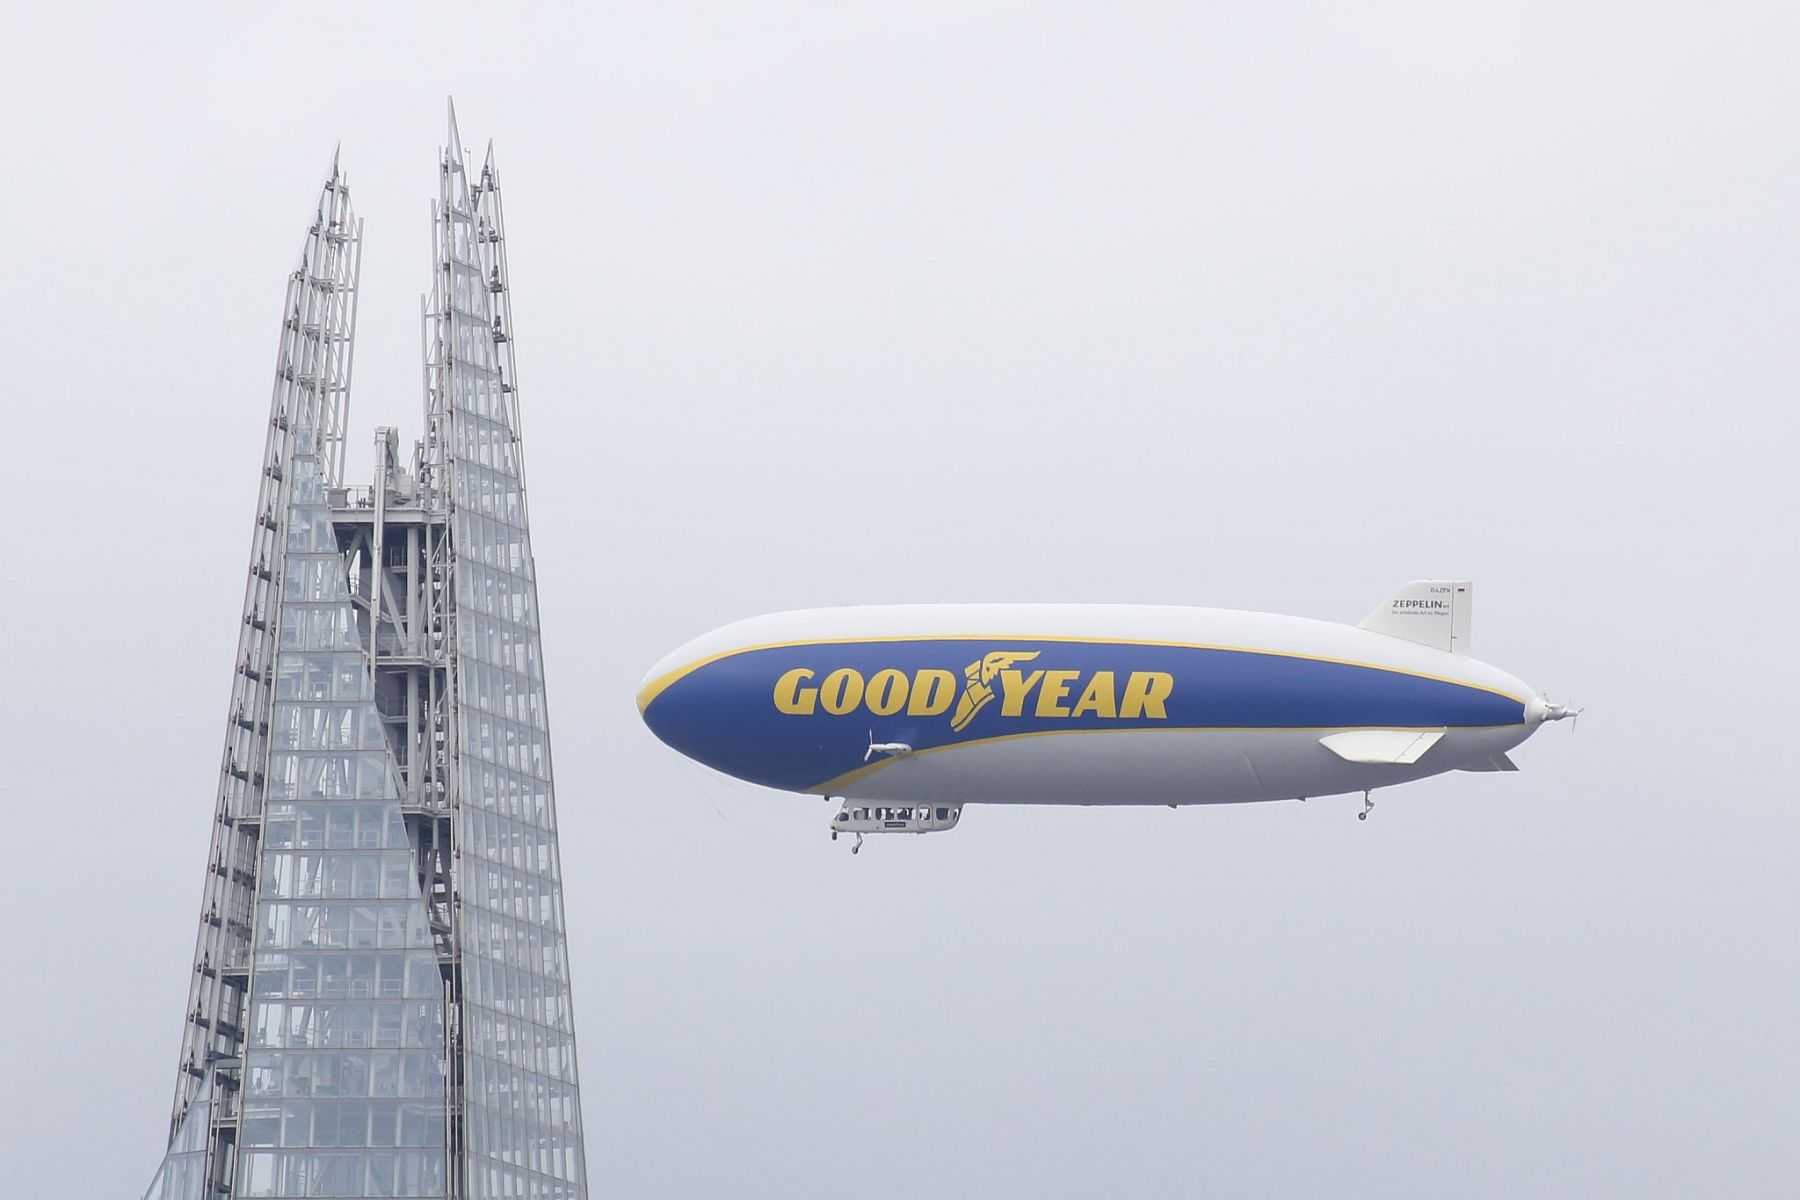 Goodyear Zeppelin Airship D-LZFN Over London next to The Shard